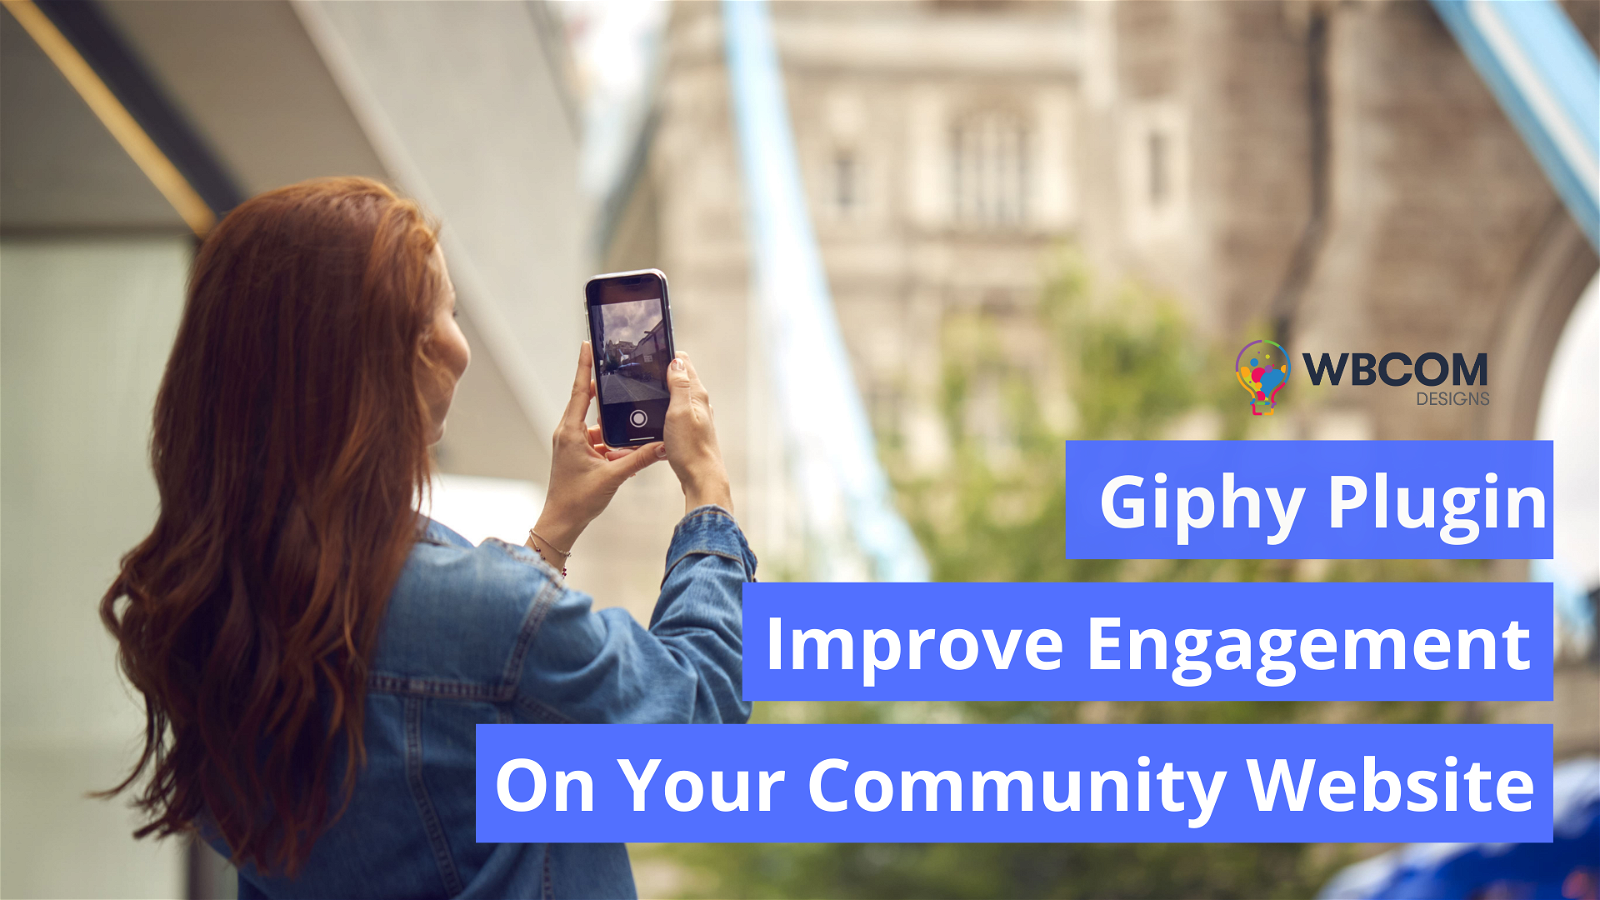 Giphy plugin for online community website